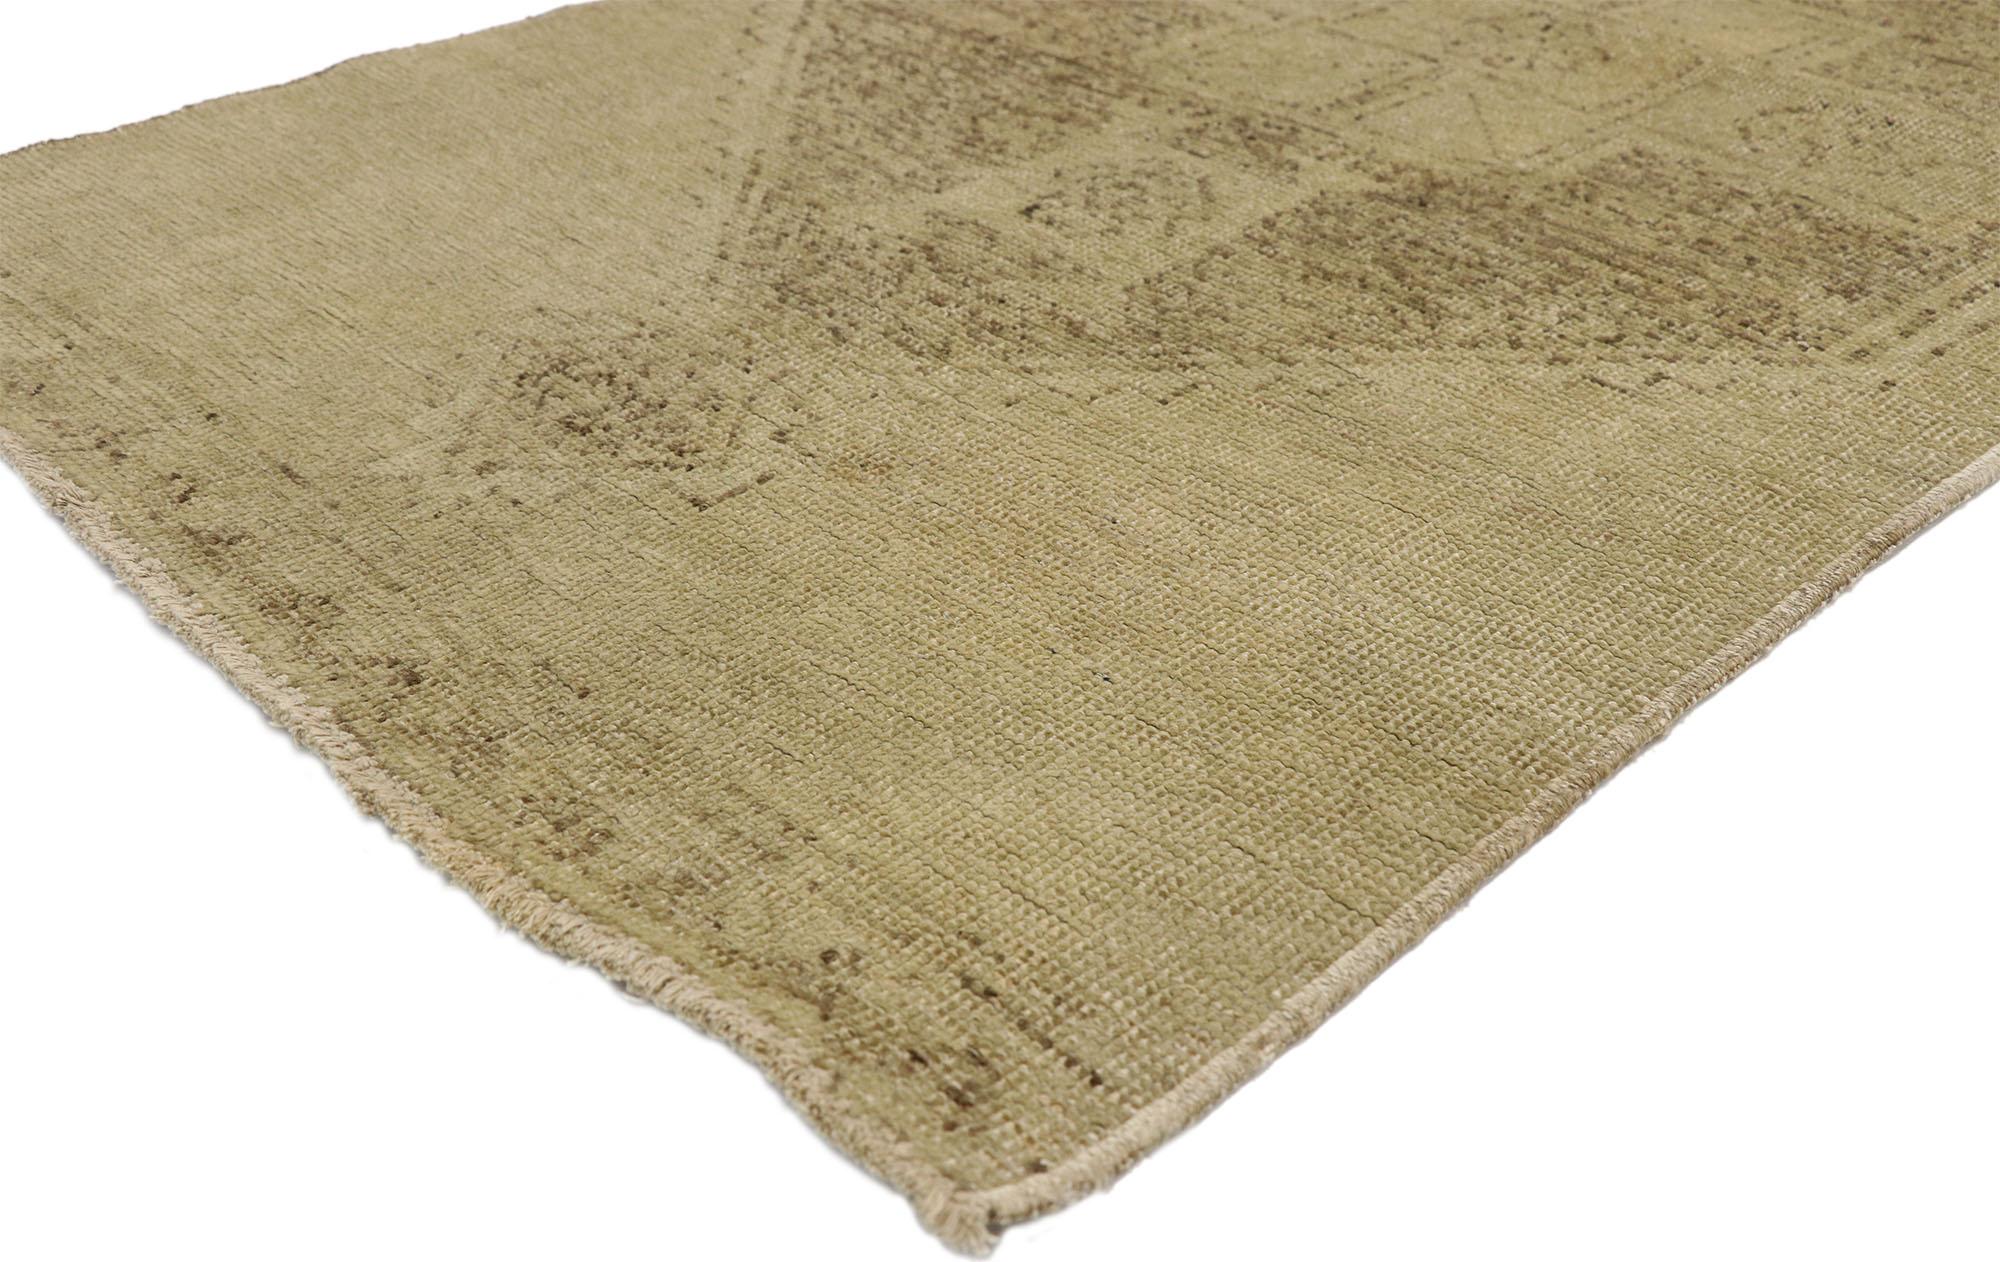 This extraordinary Oushak runner from the Provincial weaving center of Ushak features a magnificent triple medallion with a washed out alabaster beige field. The elegant neutral field tastefully blends into the Minimalist wash out background. The